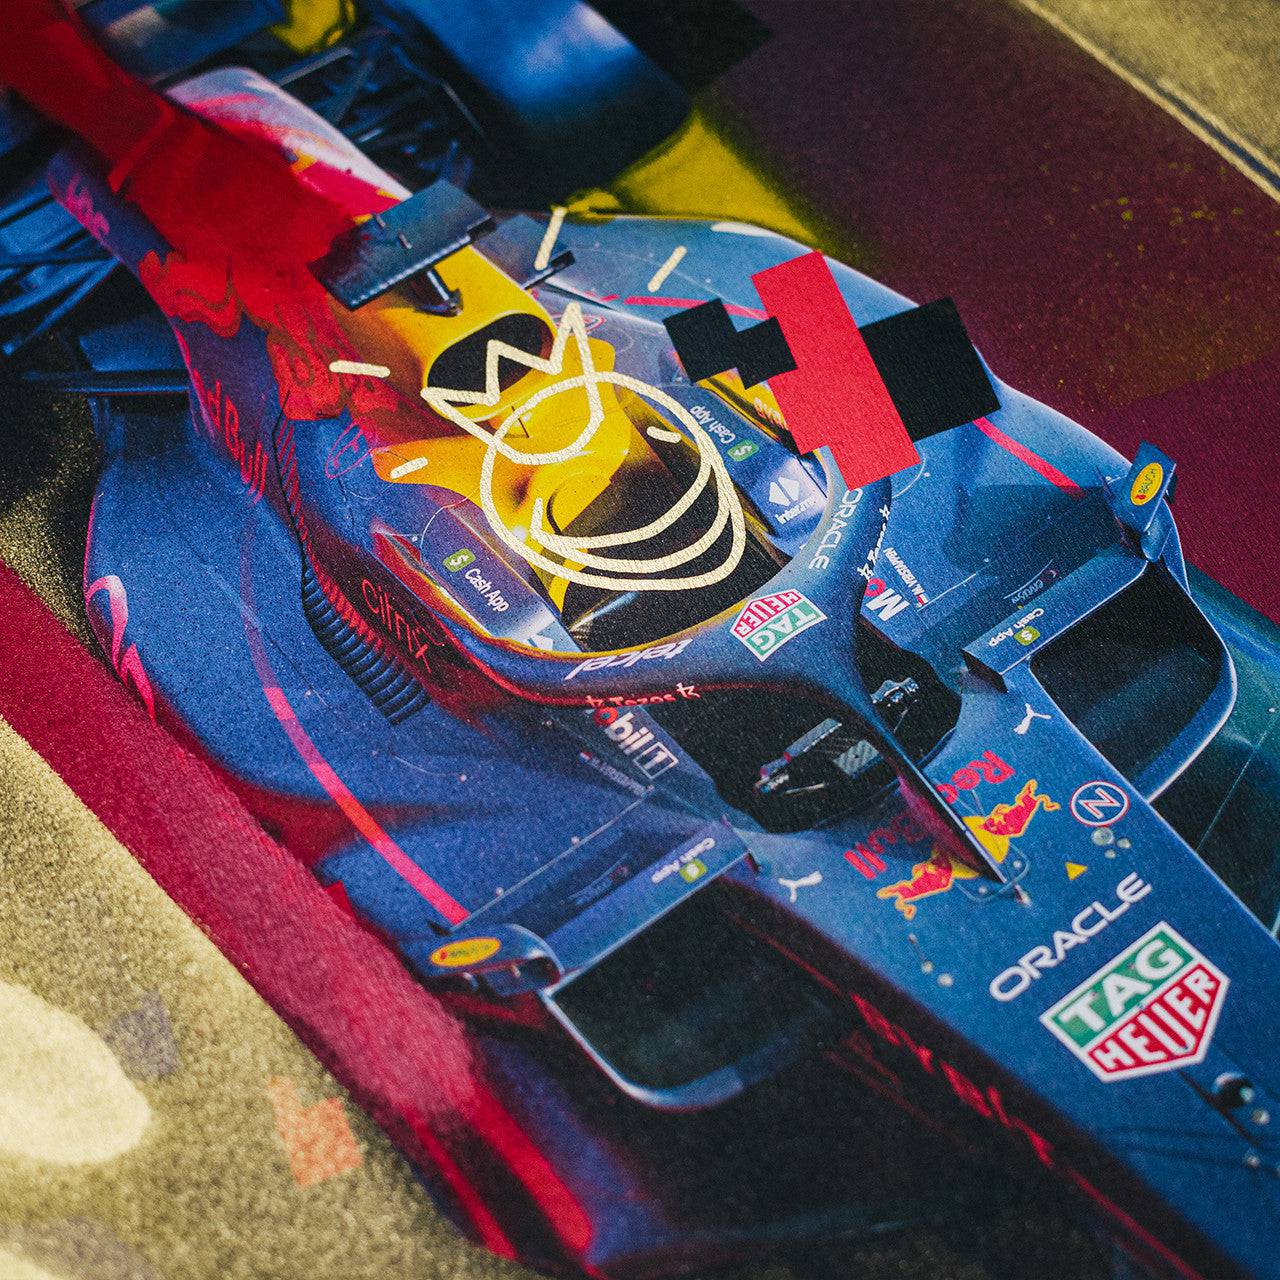 Oracle Red Bull Racing - Max Verstappen - Art to the Max - 2022 | Art Edition | #17/25